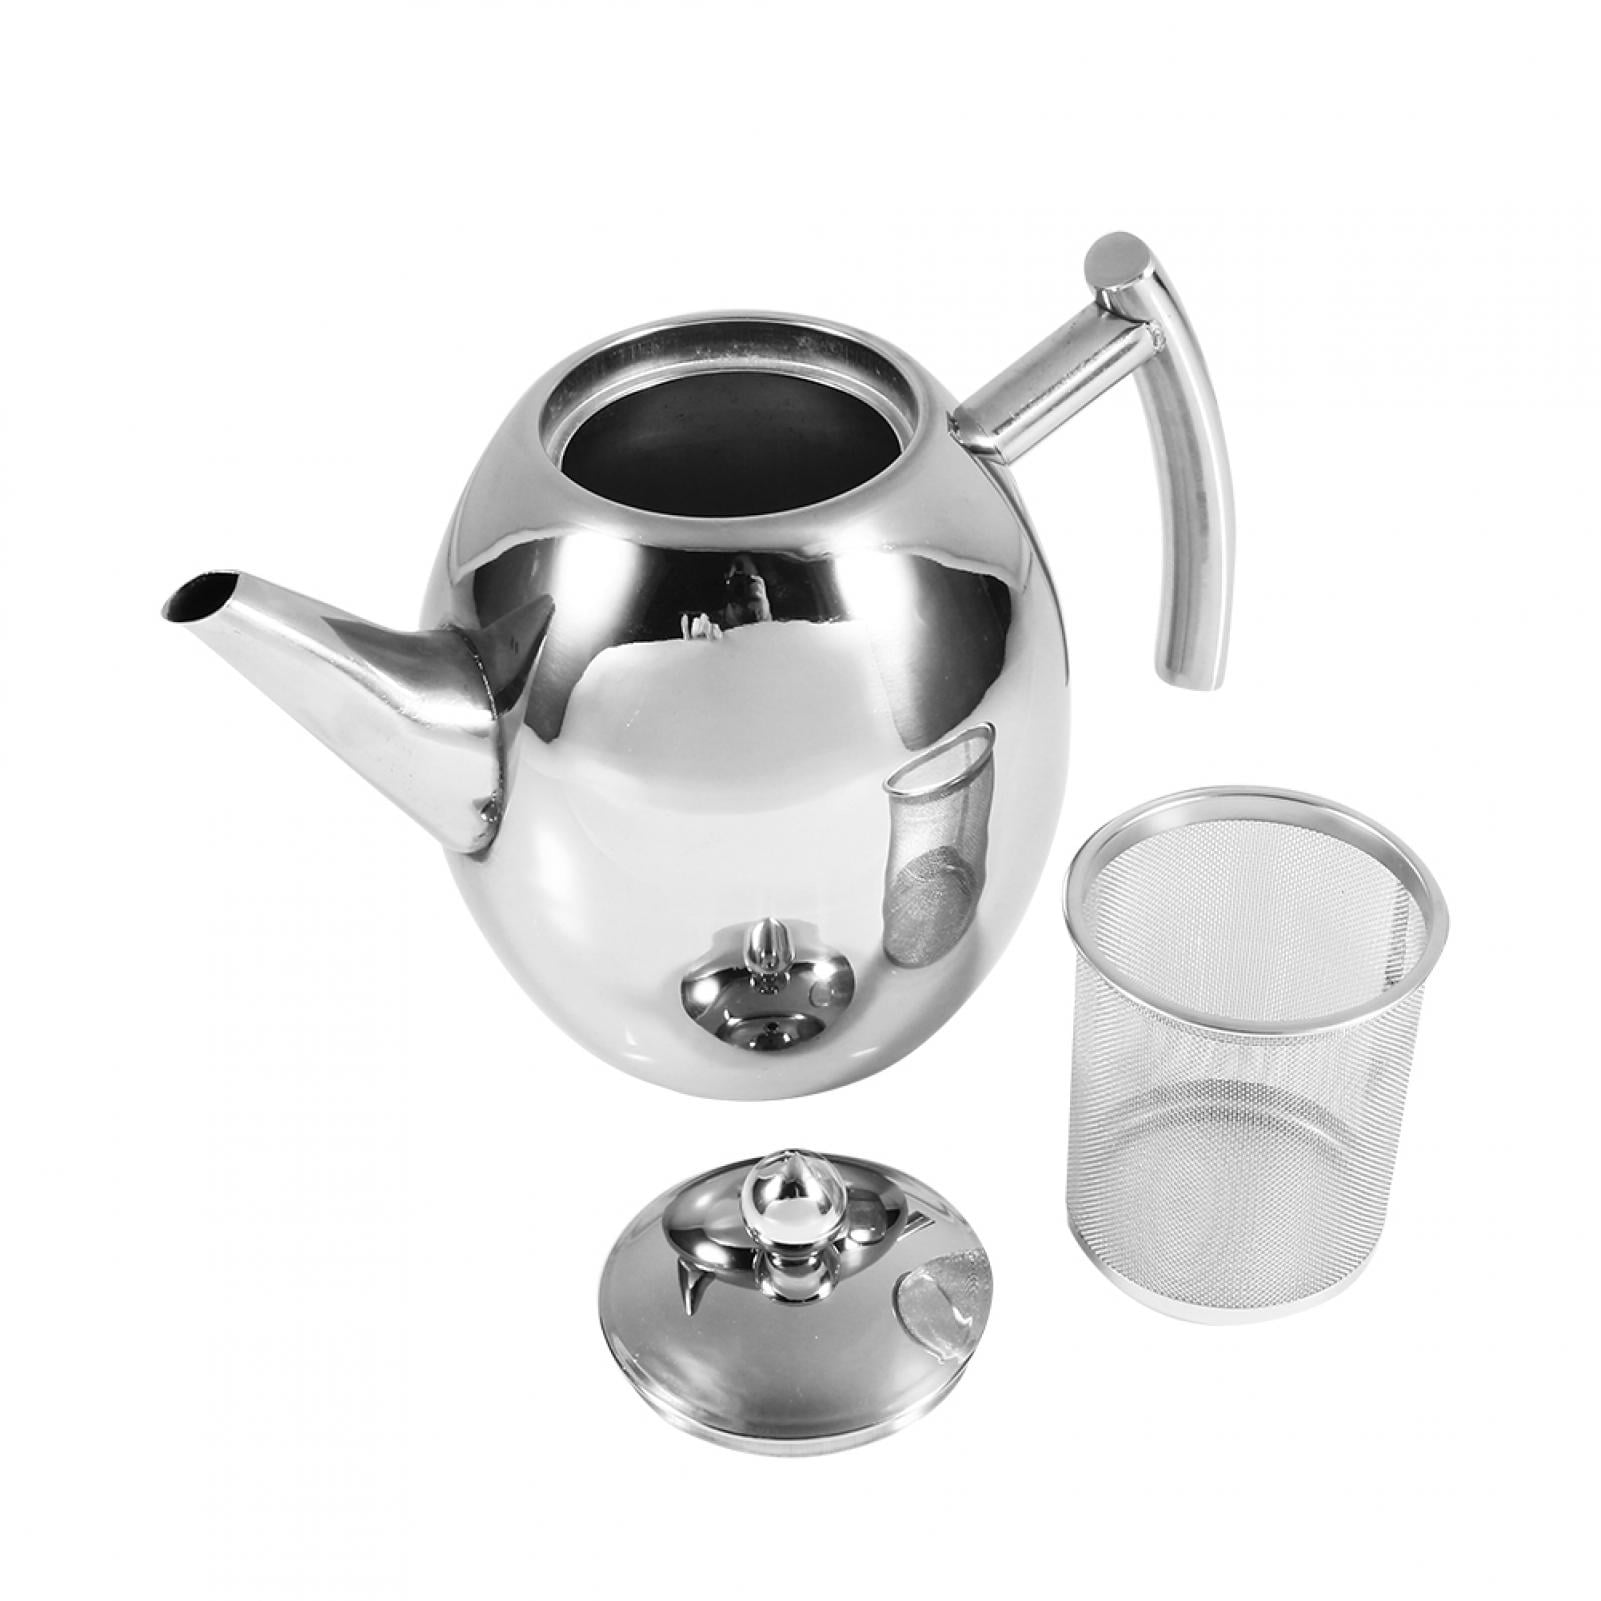 Details about  / Stainless Steel Teapot Stovetop Whistling Tea Kettle Teapot 1L//1.5L